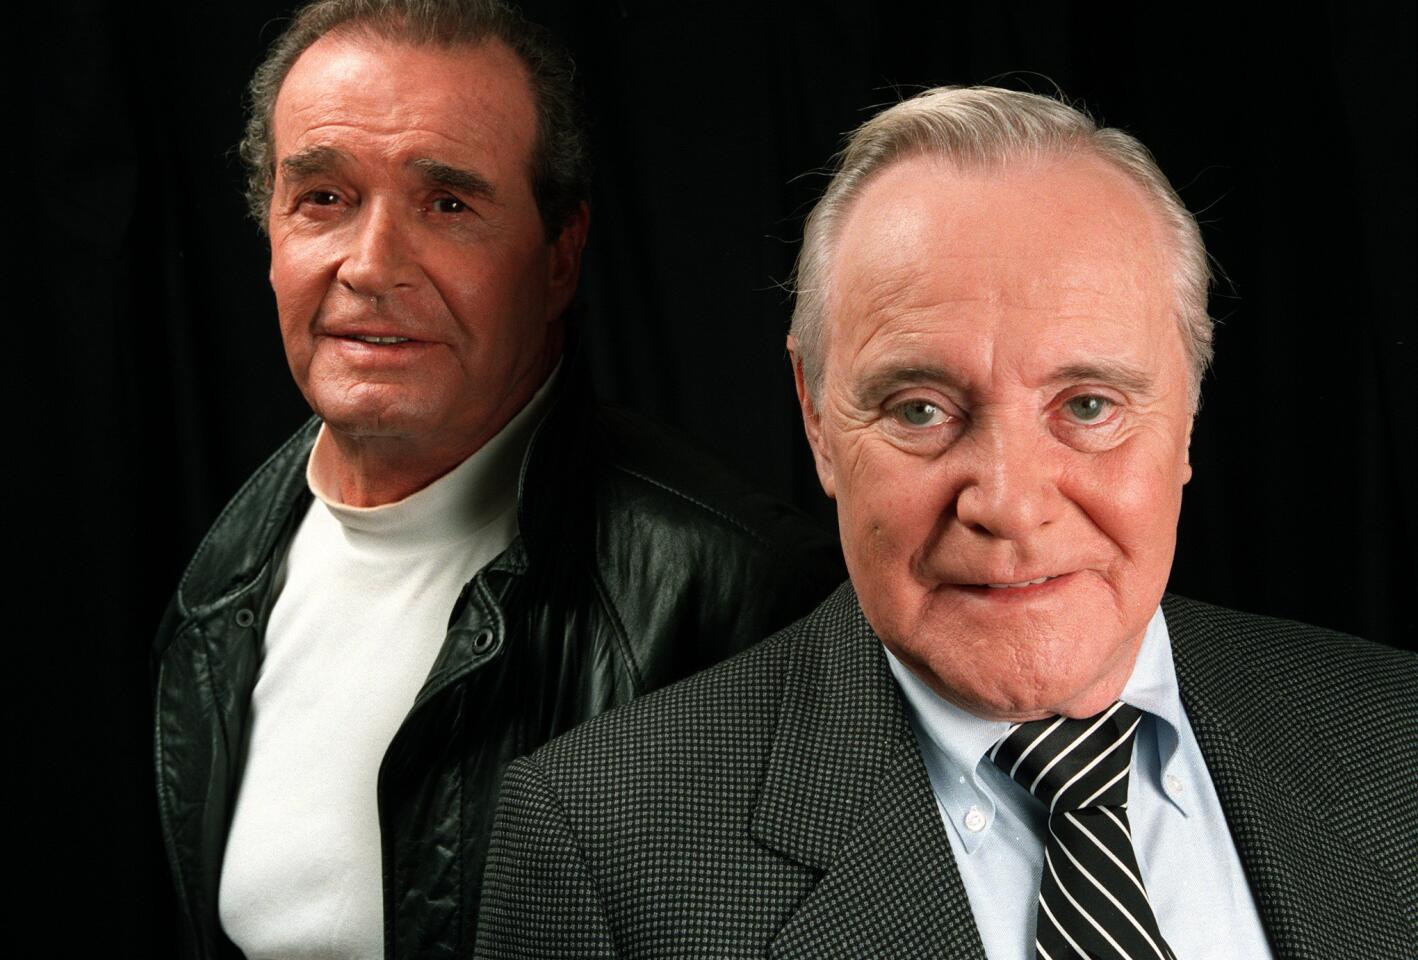 James Garner, left, and Jack Lemmon play ex-presidents in the movie "My Fellow Americans."